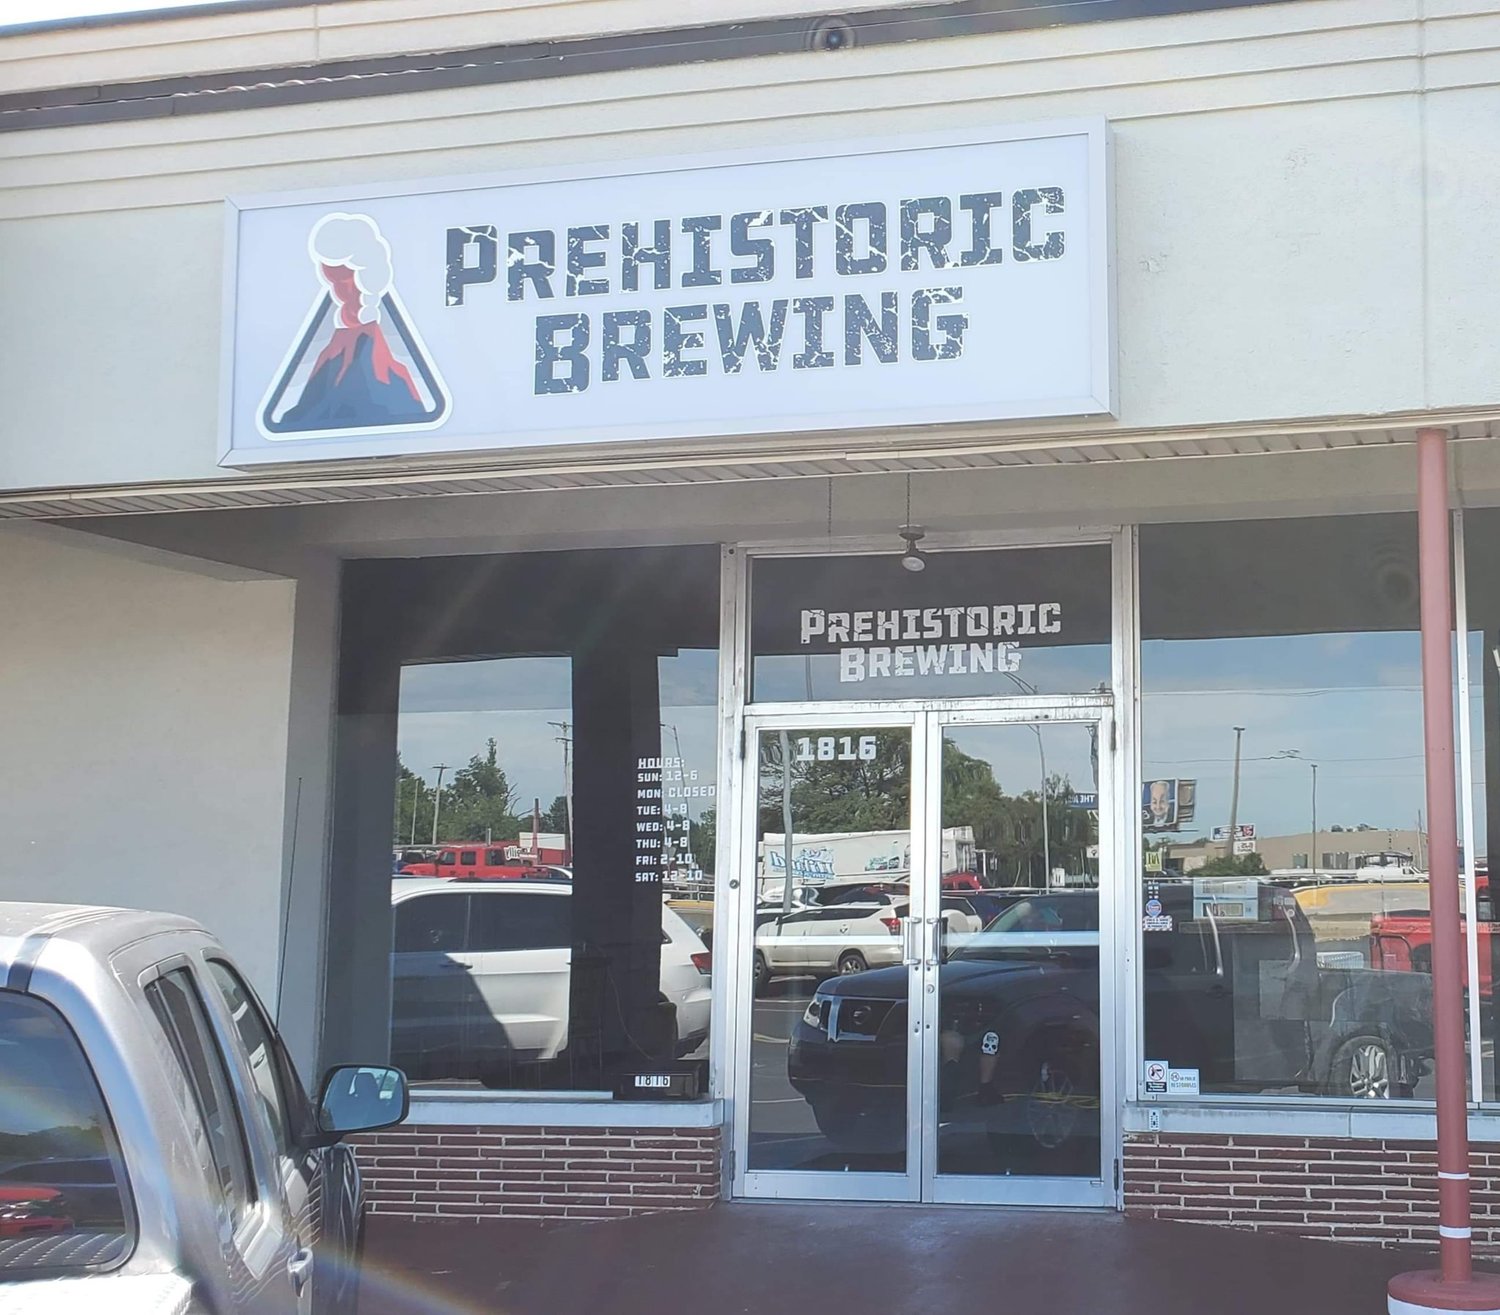 Prehistoric Brewing Co. is now open at the Plaza Shopping Center.